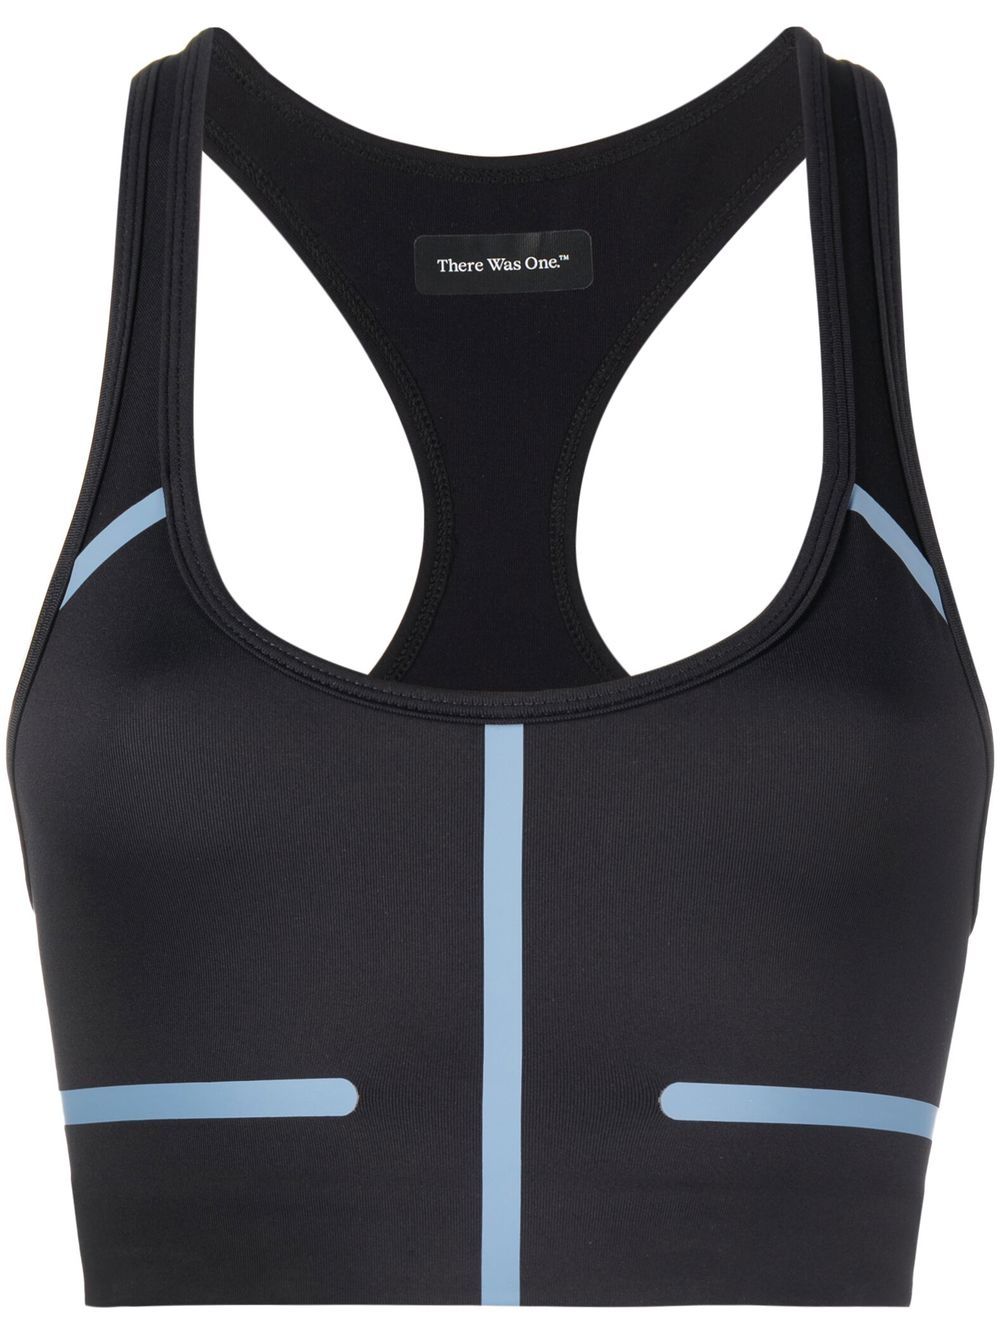 There Was One racerback sports bra - Black von There Was One